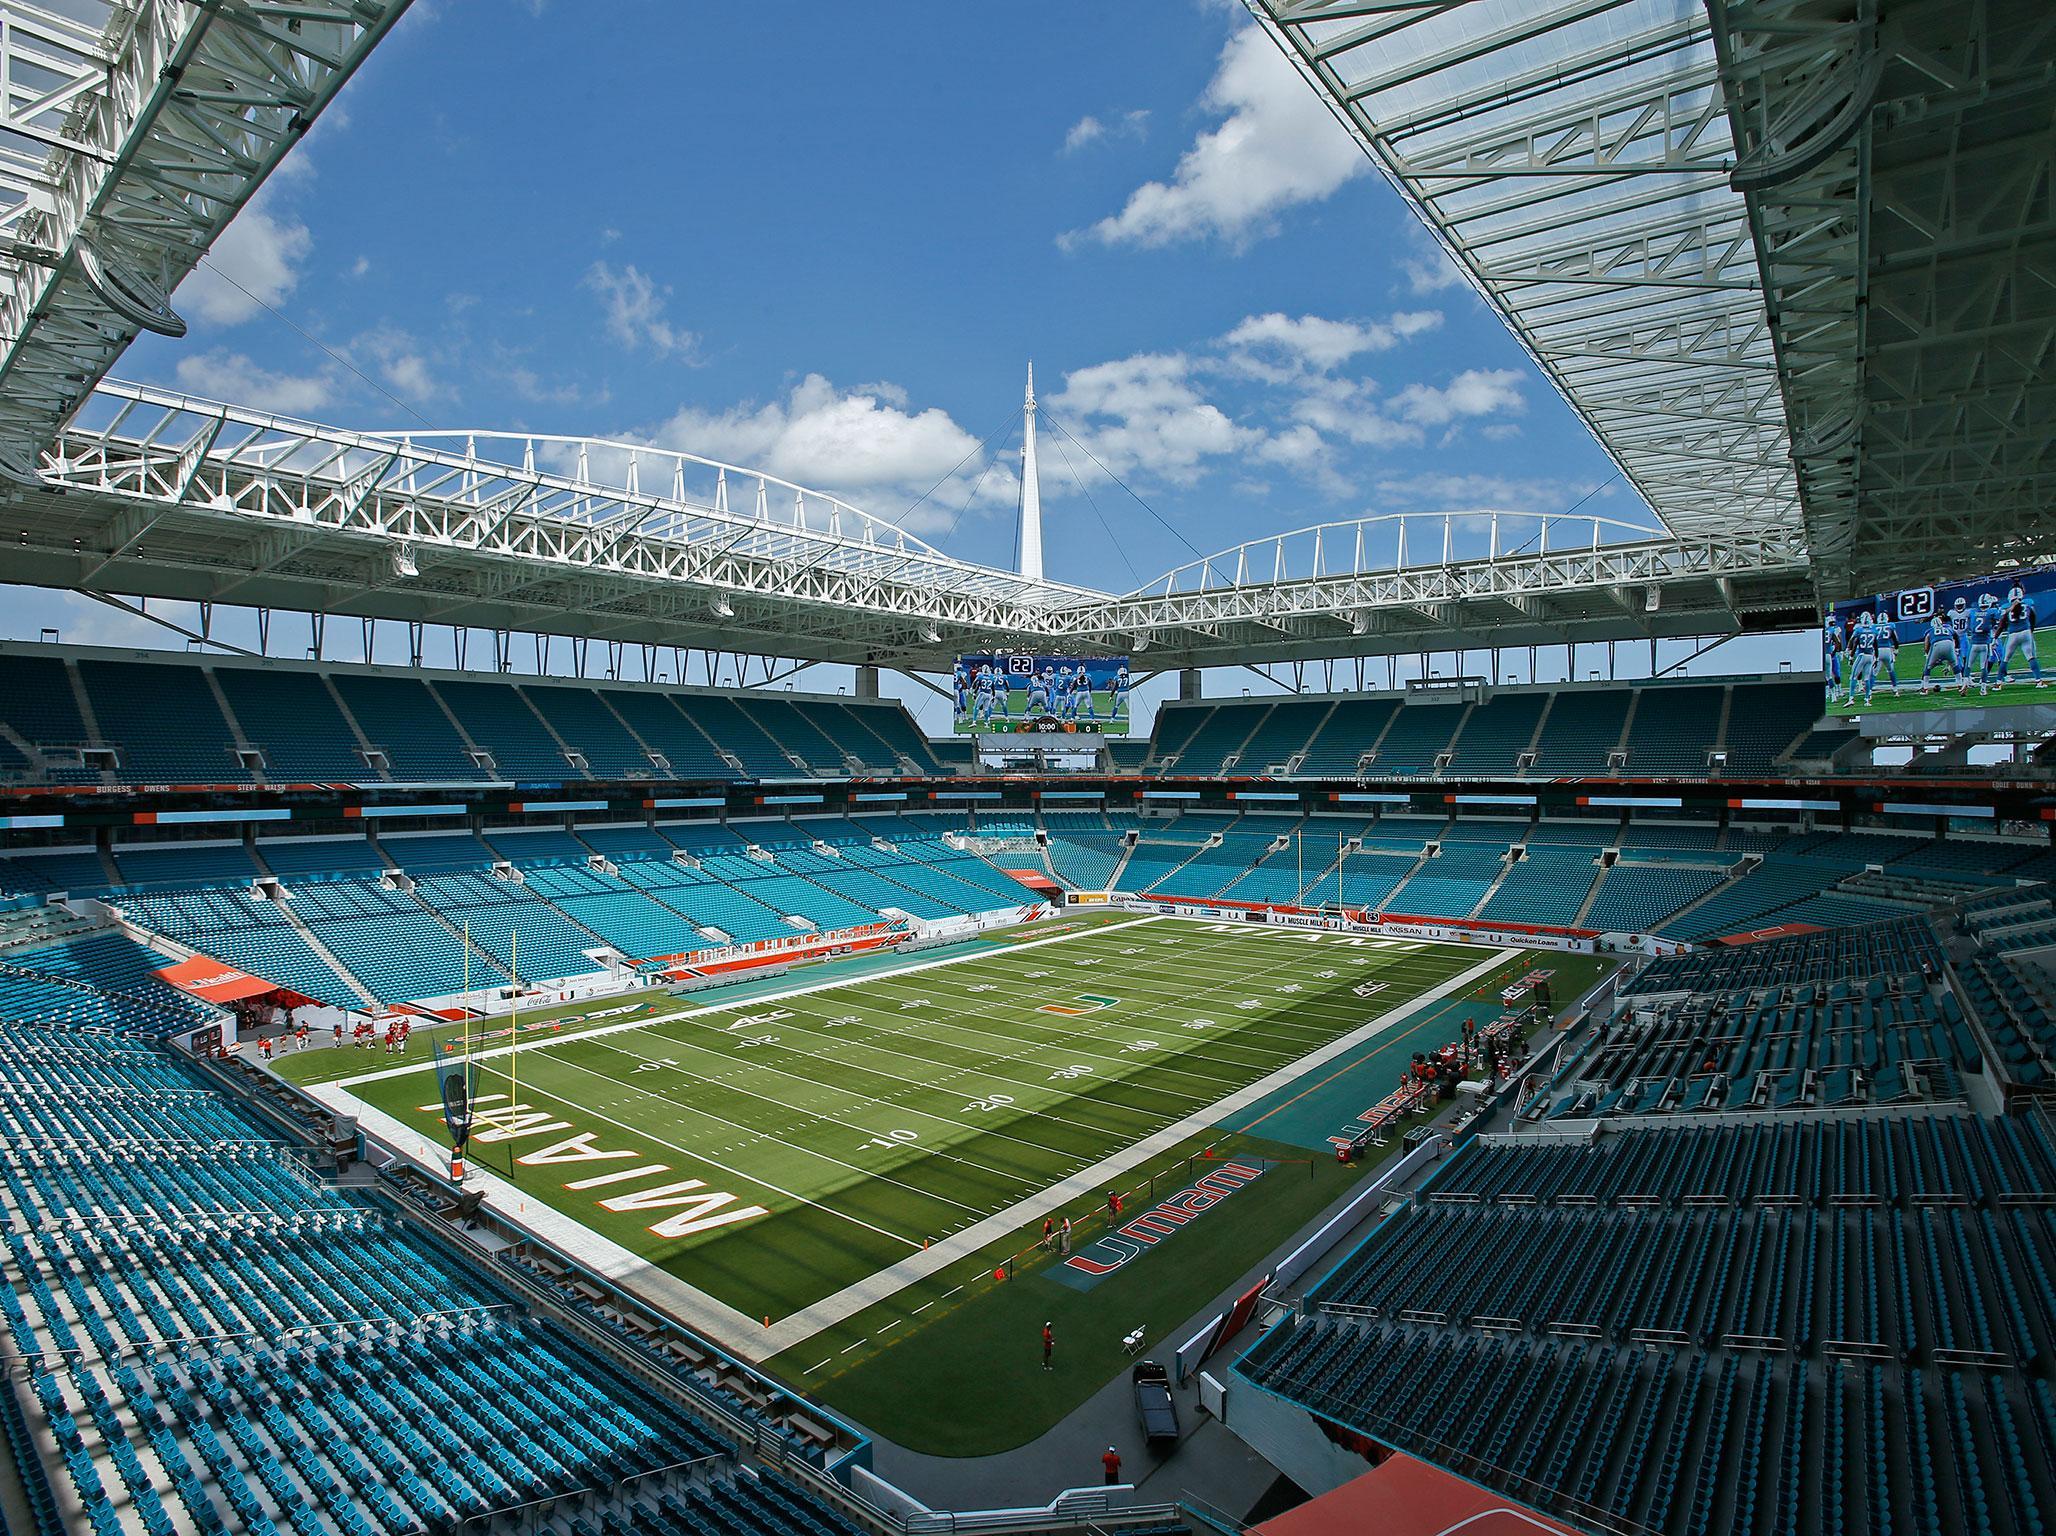 The Dolphins' regular season opener won't be played in Miami